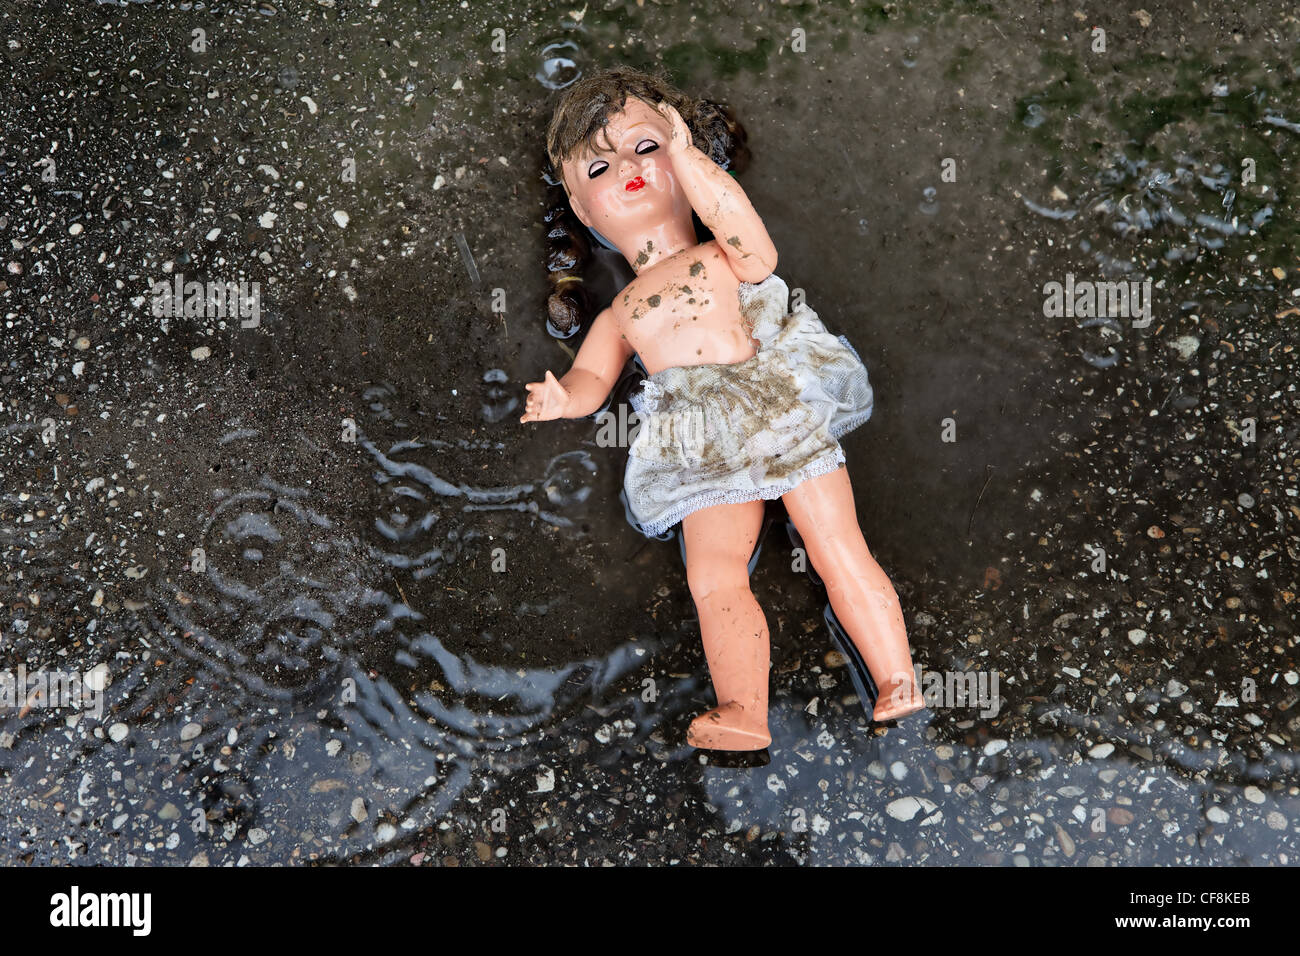 symbol of mistreatment and abuse of children. doll lying on the ground Stock Photo